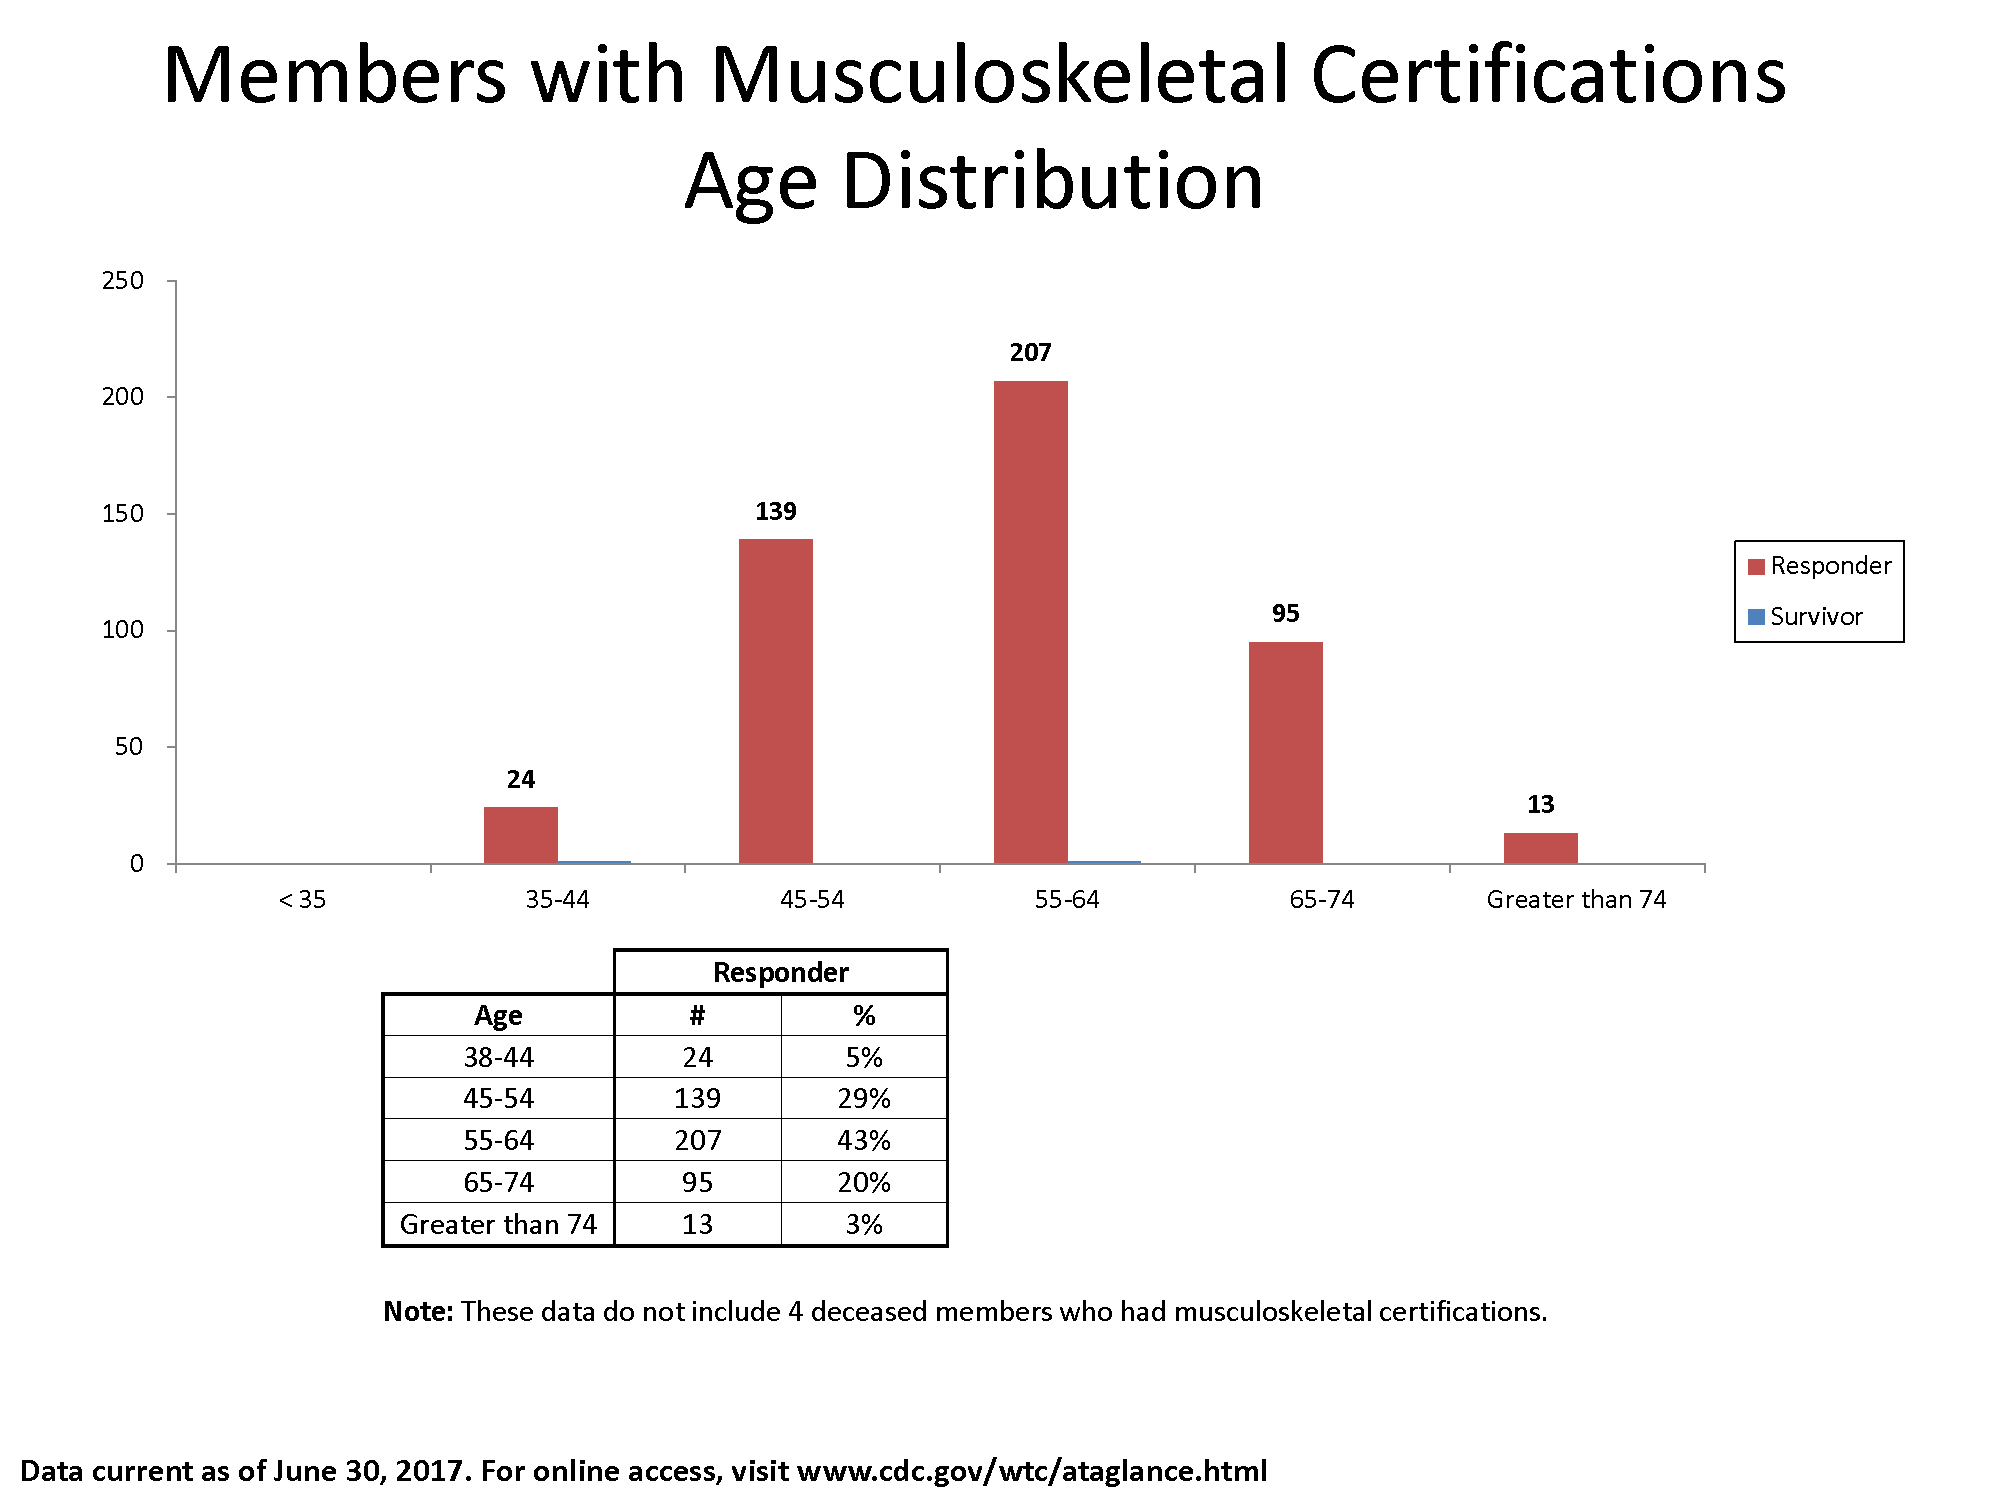 Bar chart of data in the table showing the number of members with musculoskeletal certifications by Responder and Survivor and age bracket.